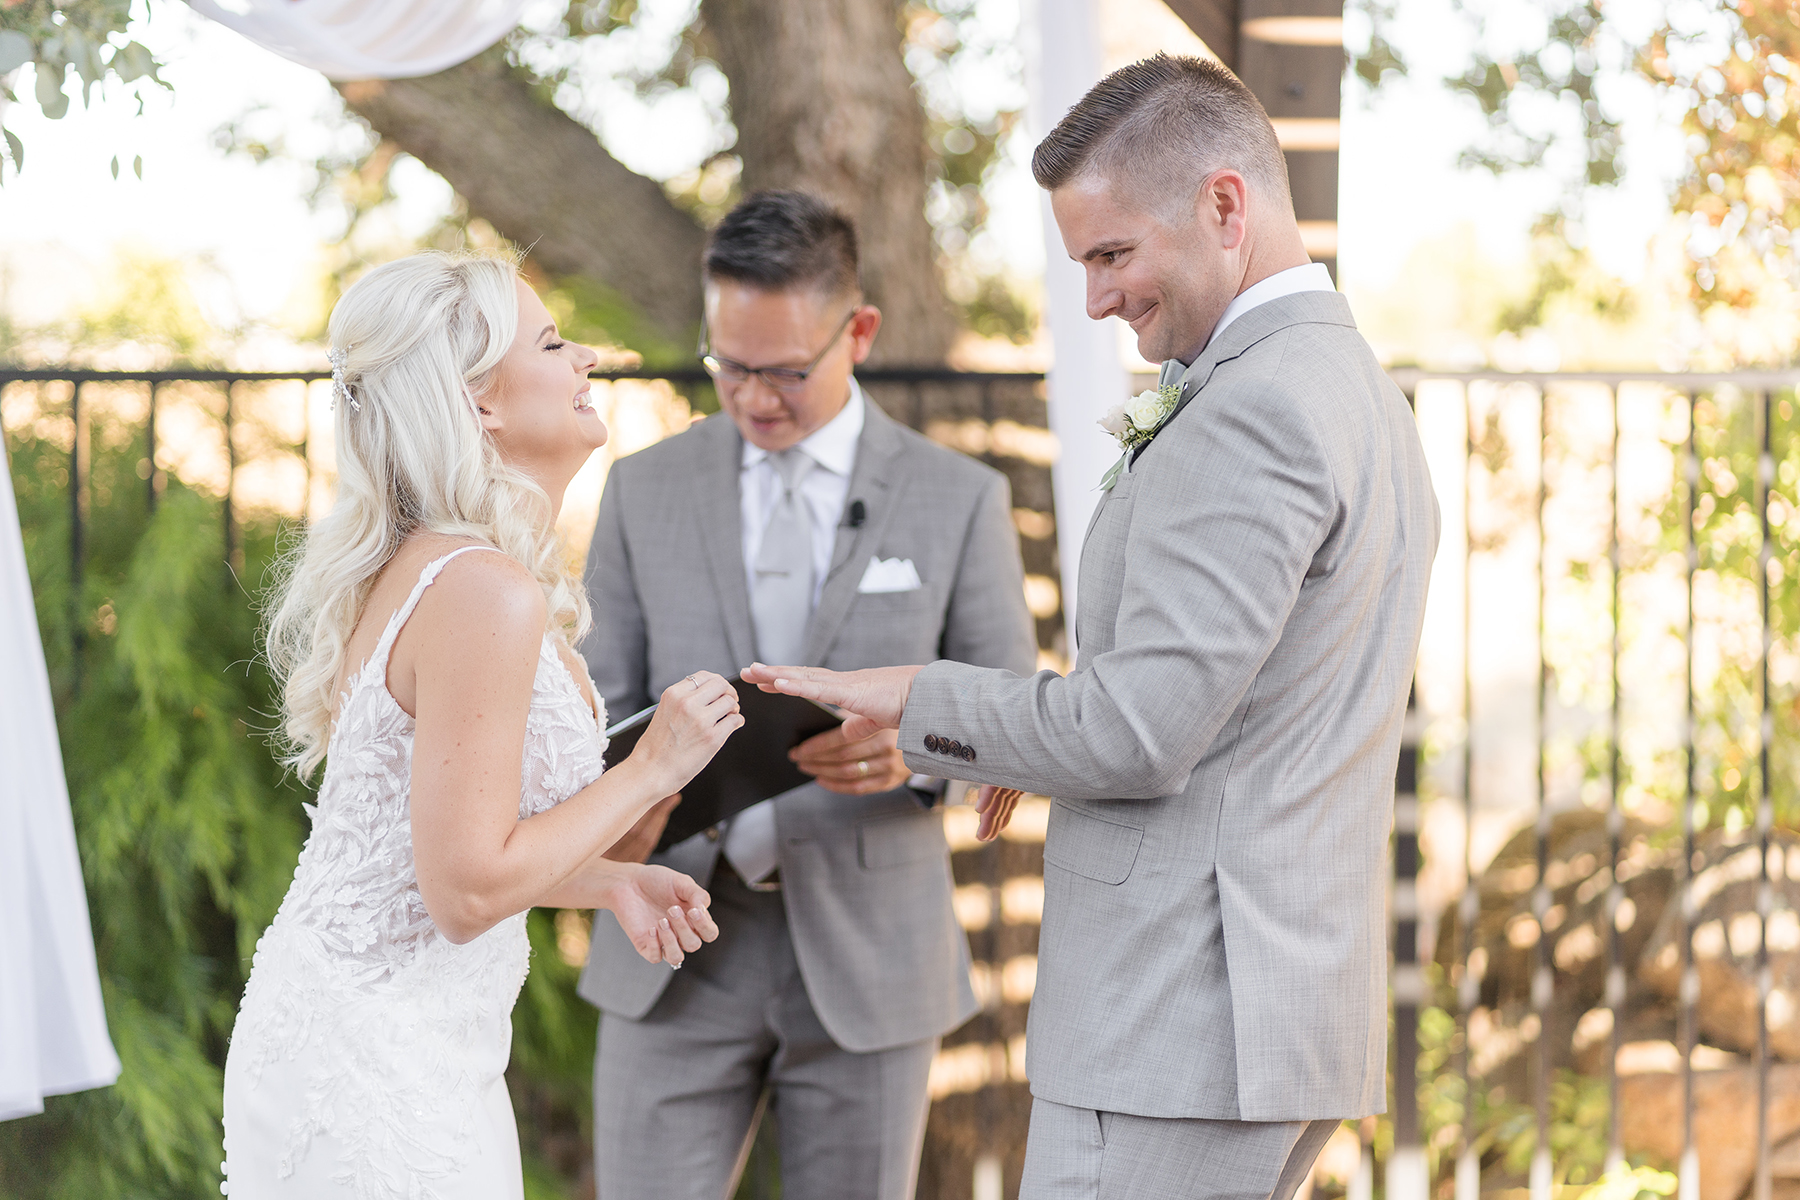 elk grove evergreen springs wedding ceremony by Adrienne and Dani Photography